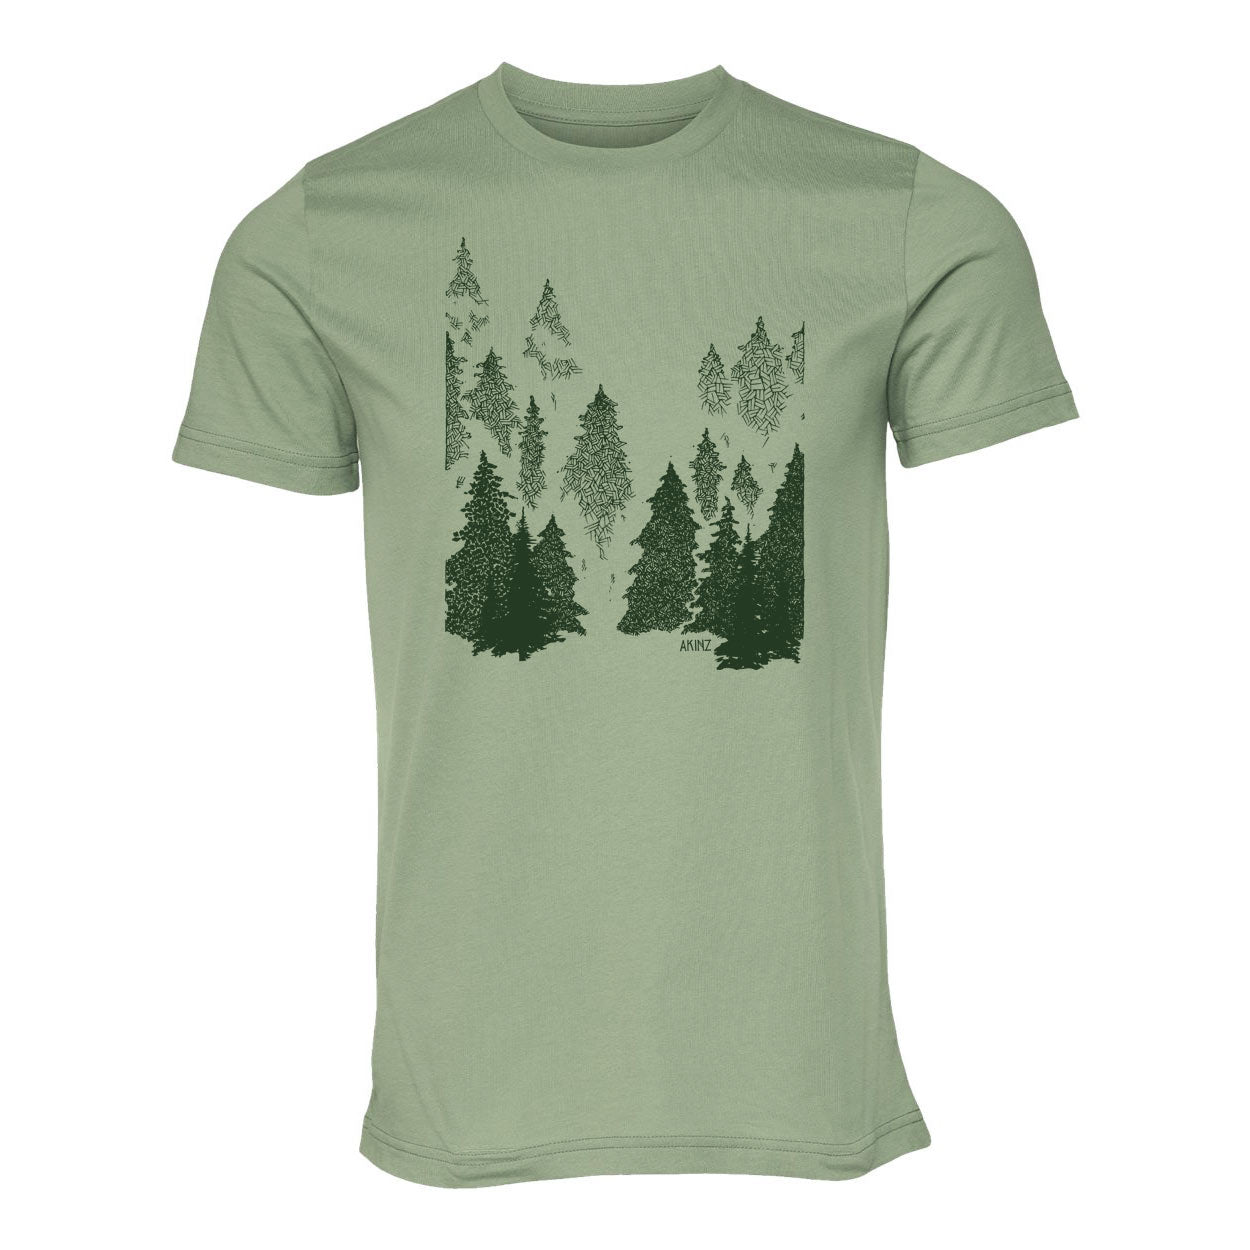 into-the-evergreen-sage-green-trees-t-shirt.jpg